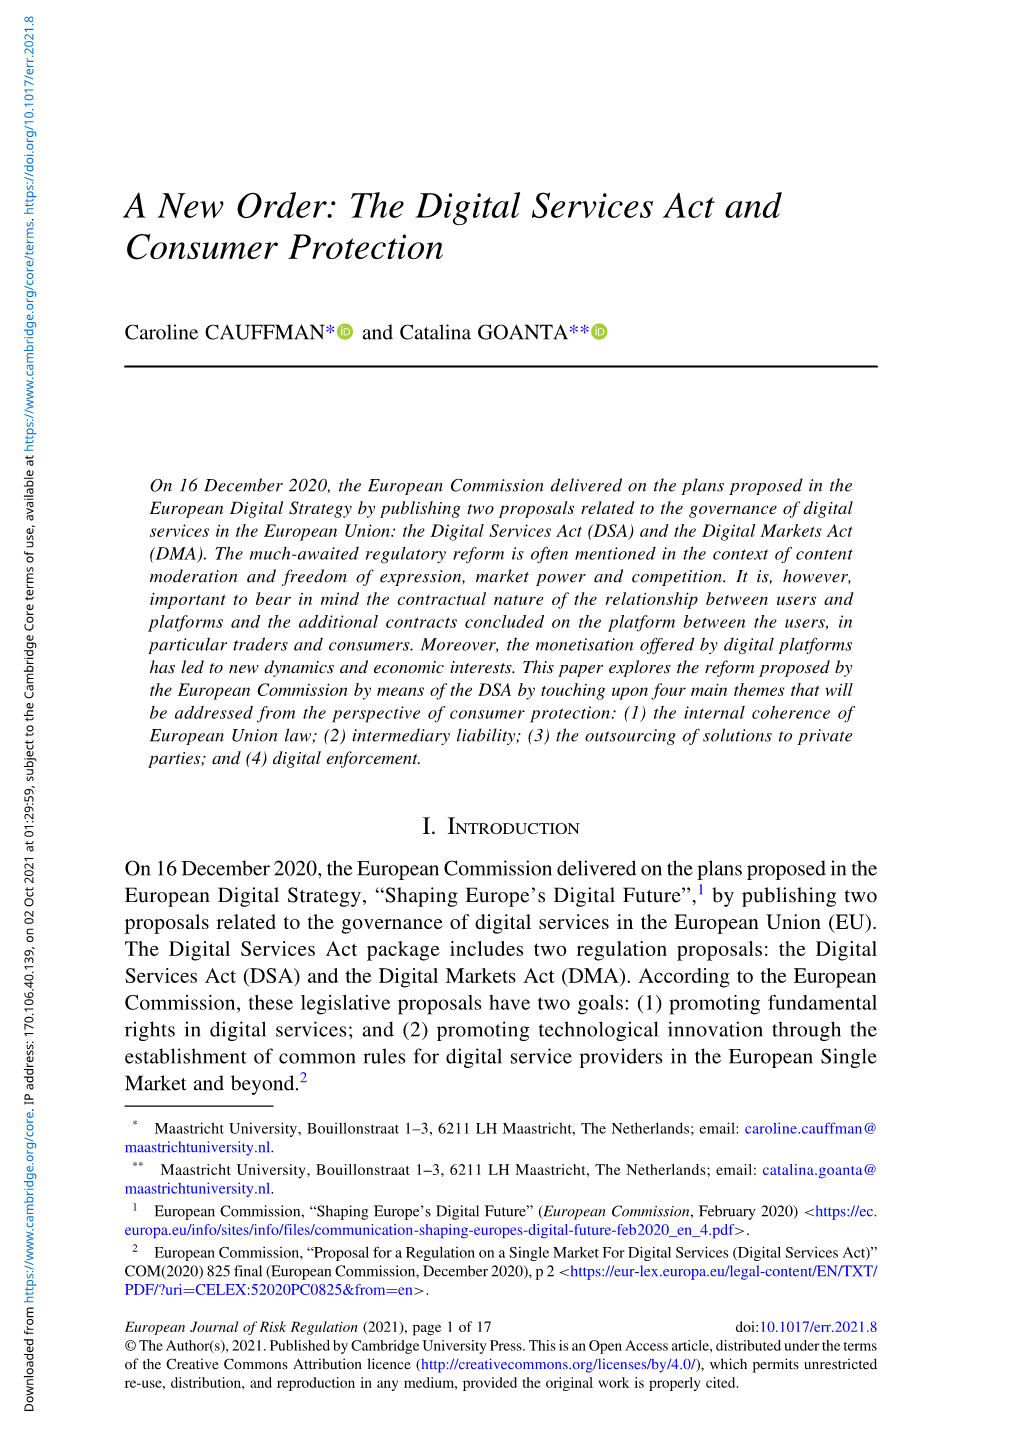 A New Order: the Digital Services Act and Consumer Protection